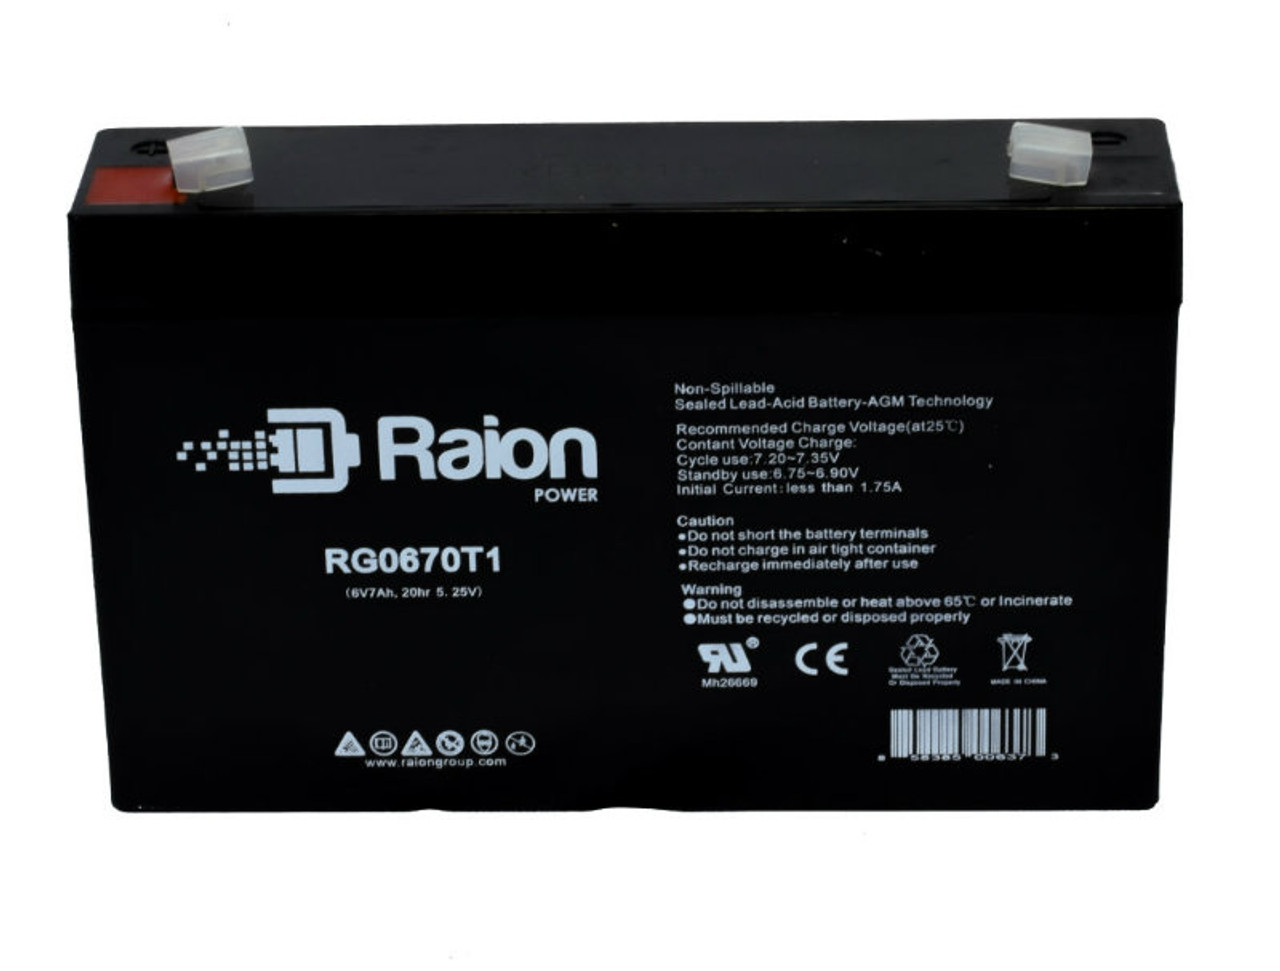 Raion Power RG0670T1 Replacement Battery Cartridge for IMED Gemini PC-1-Model 1310